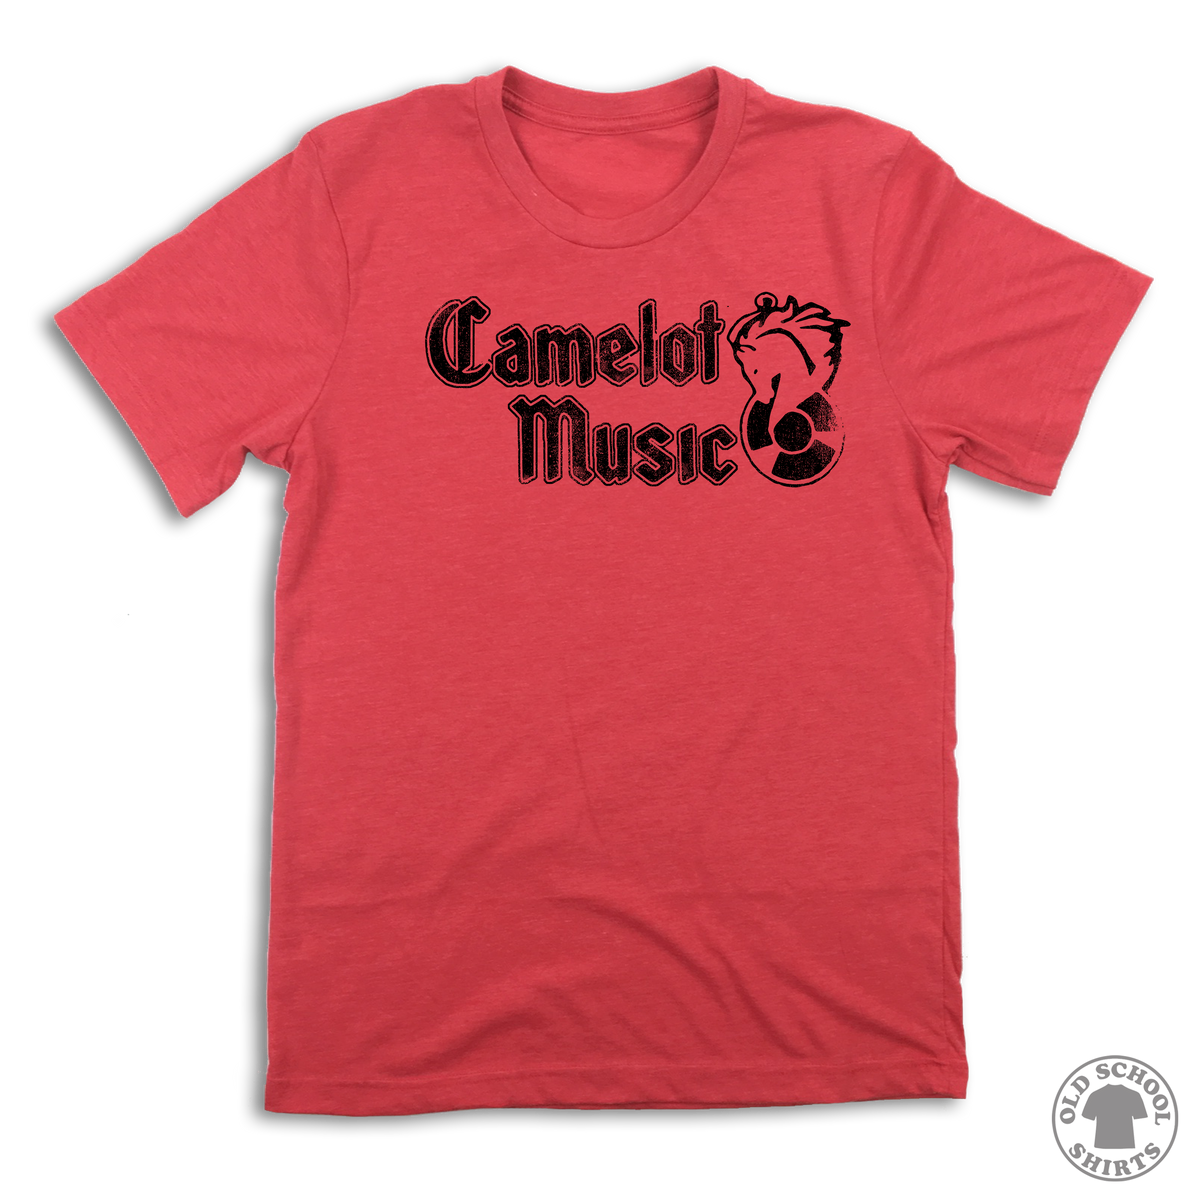 Camelot Music - Old School Shirts- Retro Sports T Shirts